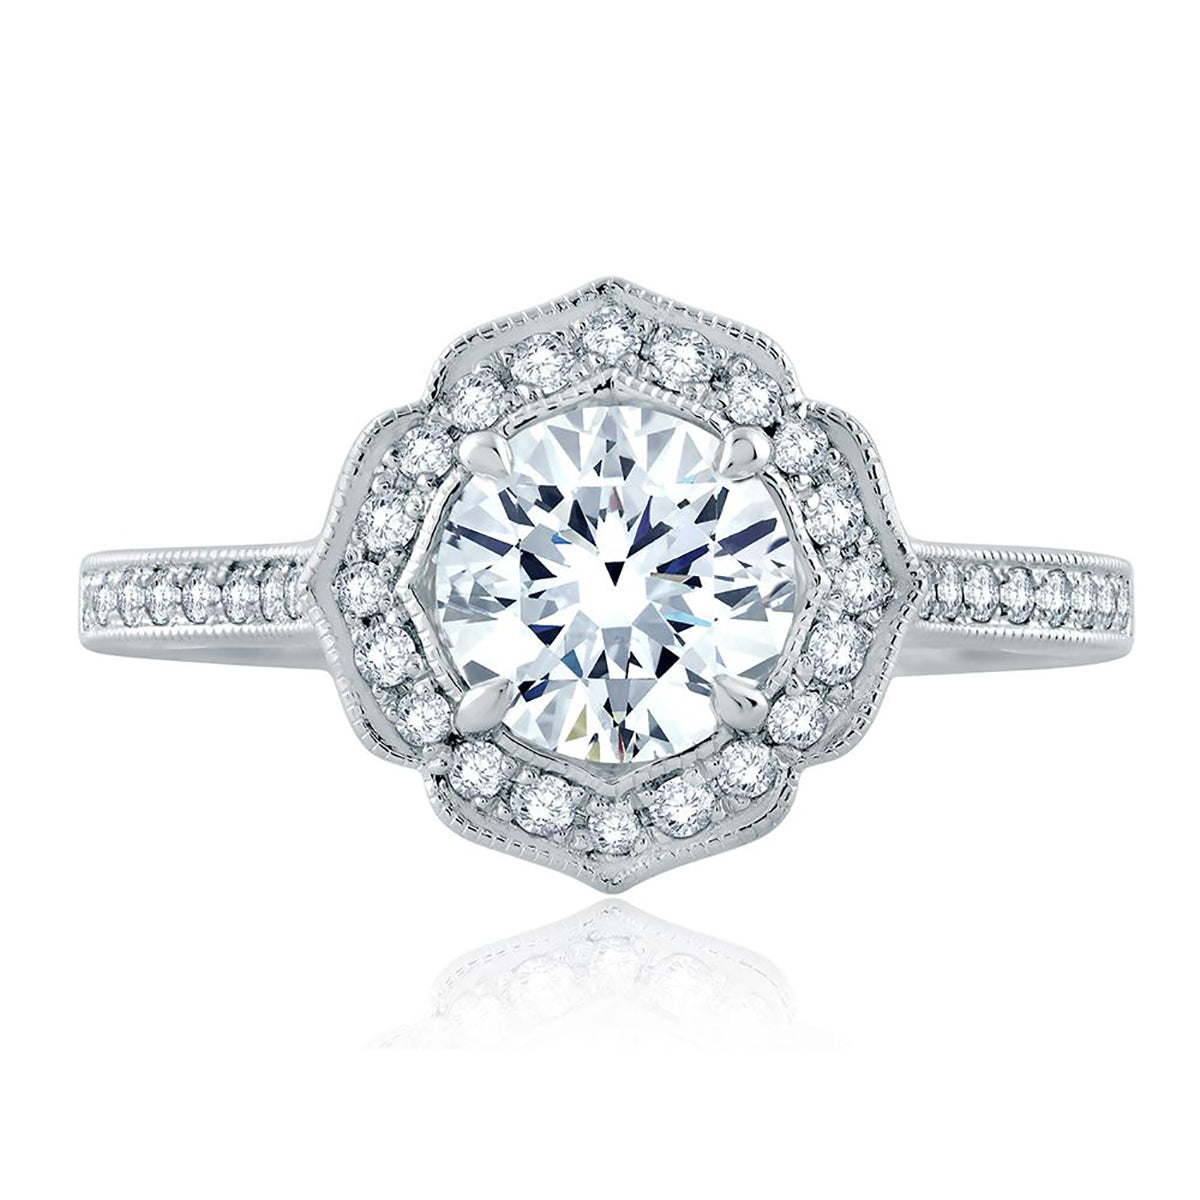 A.Jaffe Floral Inspired Milgrain Detail Diamond Halo Quilted Engagement Ring ME2191Q/122